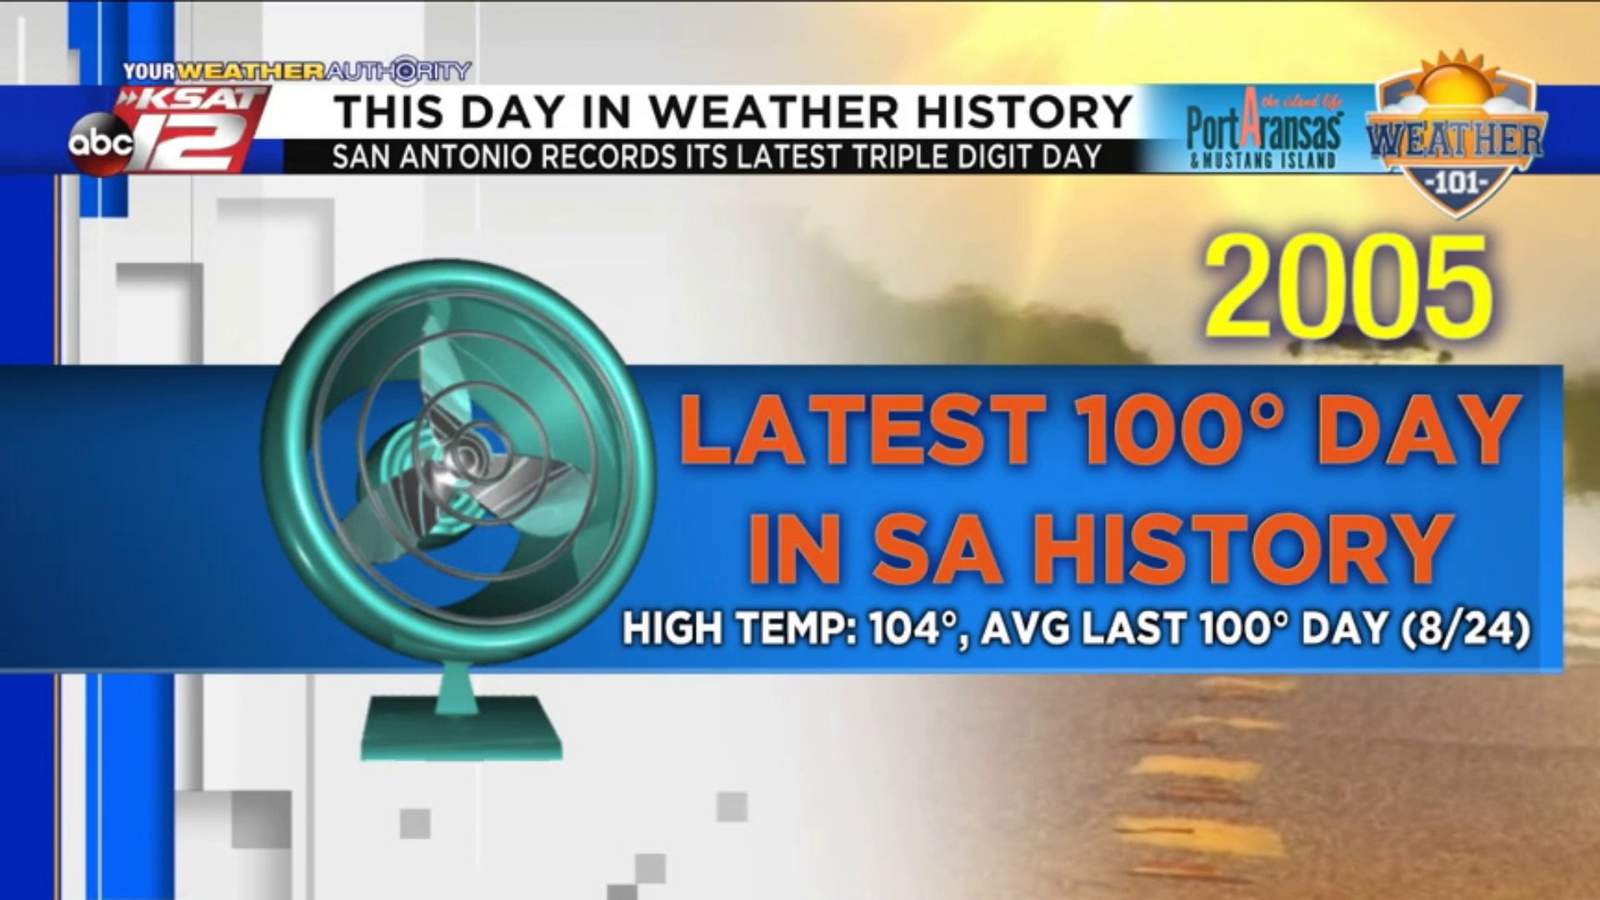 This Day in Weather History: September 28th